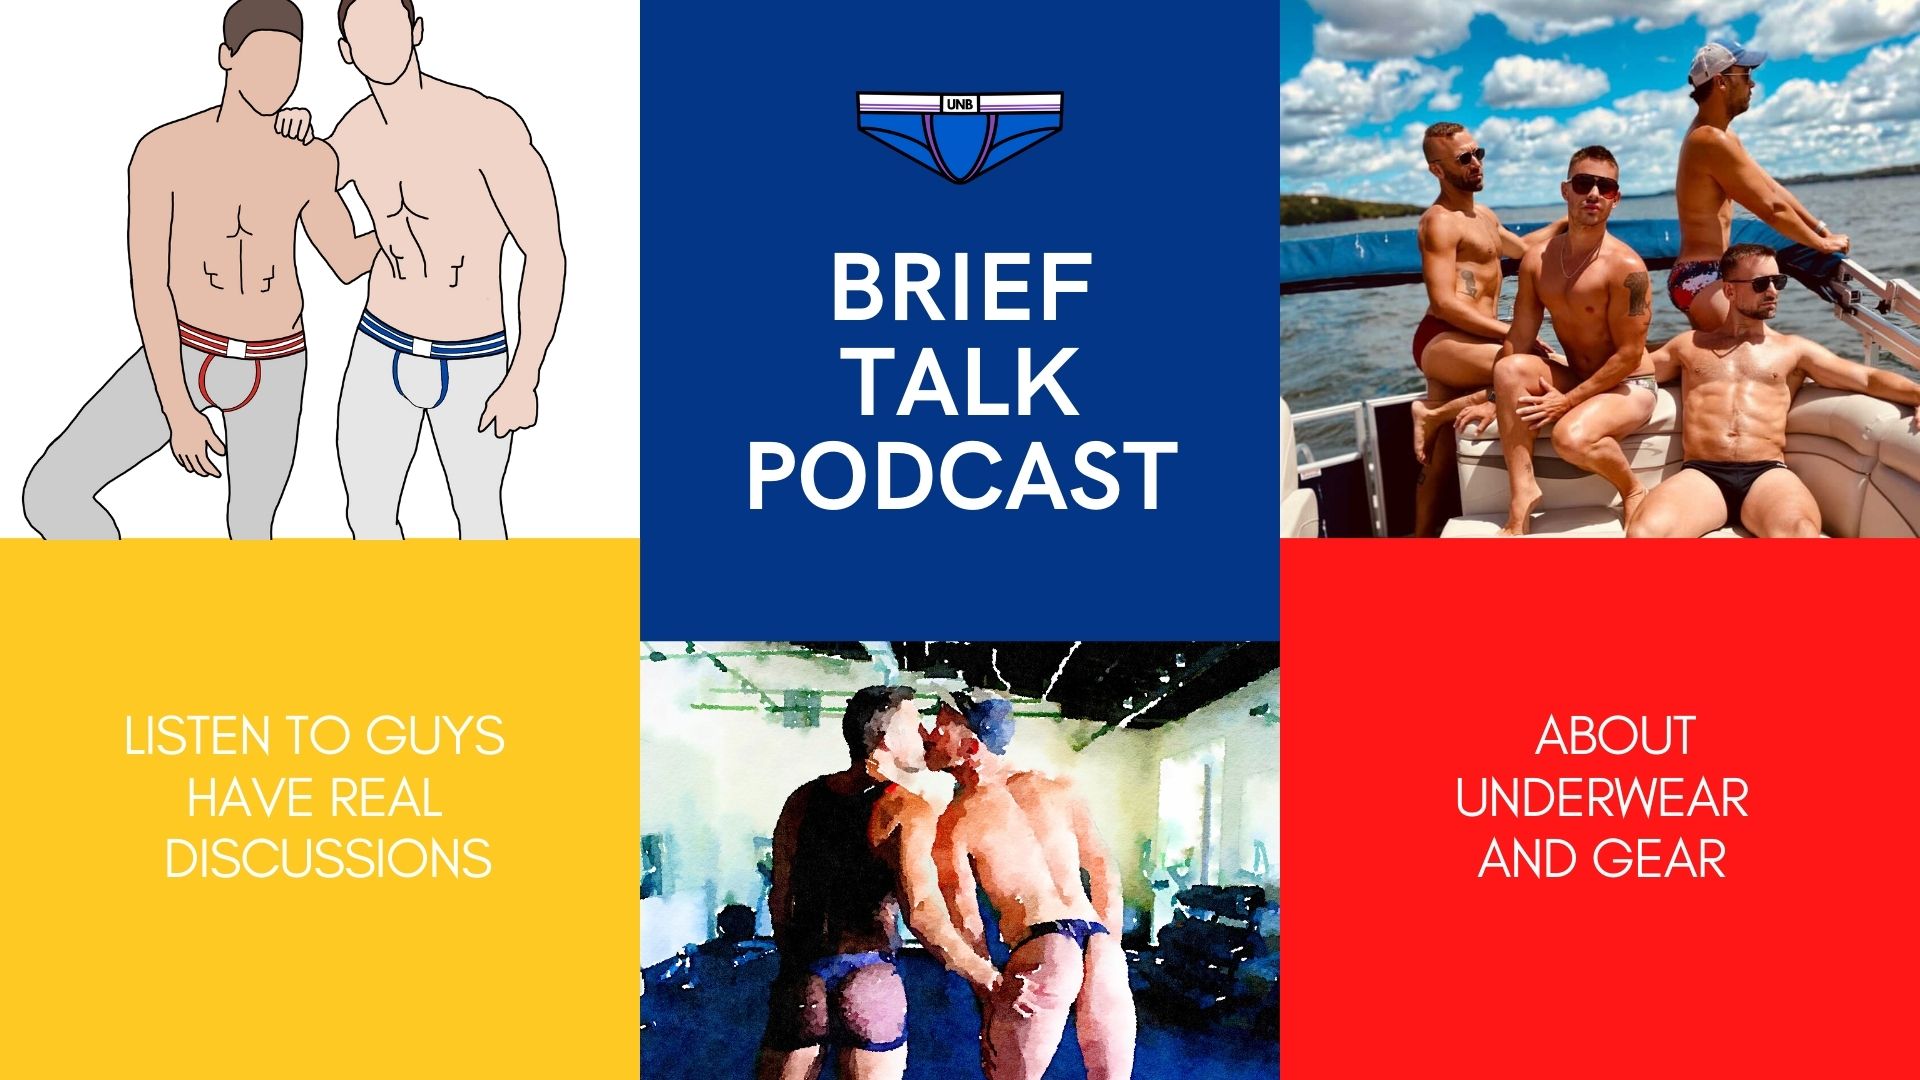 Listen to the UNB Podcast - Brief Talk